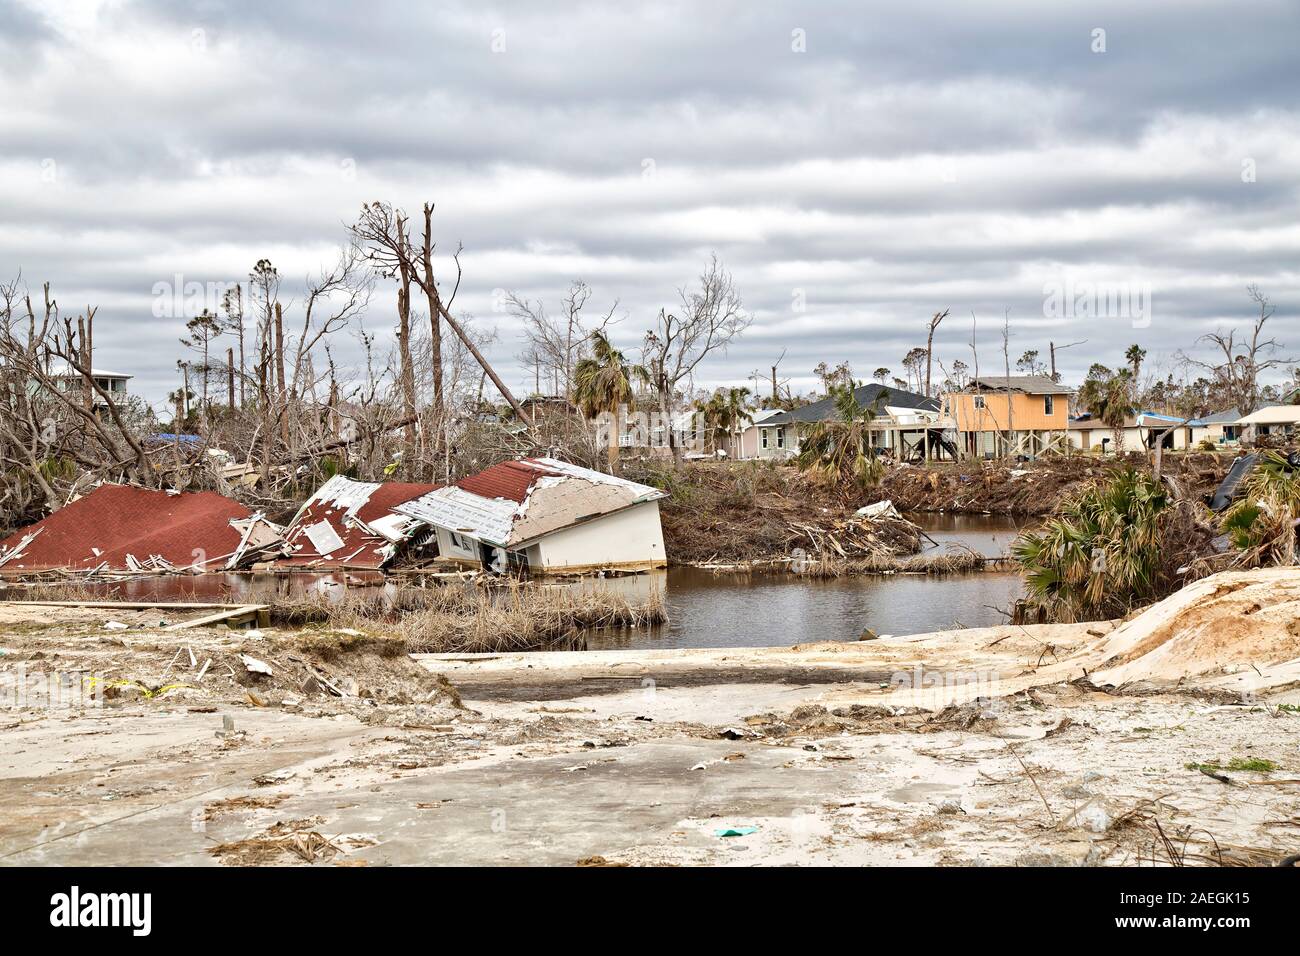 Destruction of homes & property resulting from Hurricane  Michael 2018,  near Mexico Beach, Florida Panhandle. Stock Photo